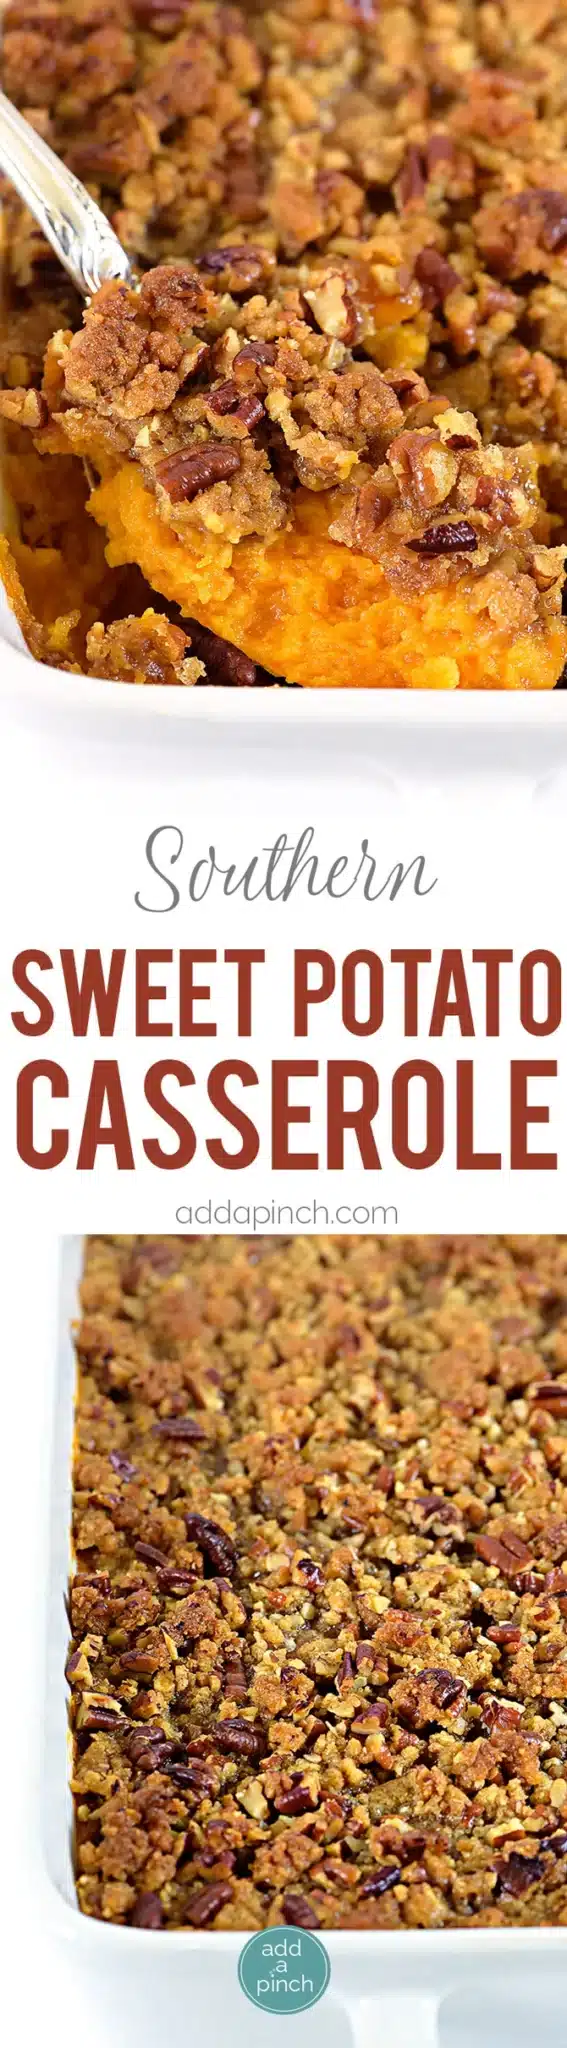 Collage of sweet potato casserole photos with title text.